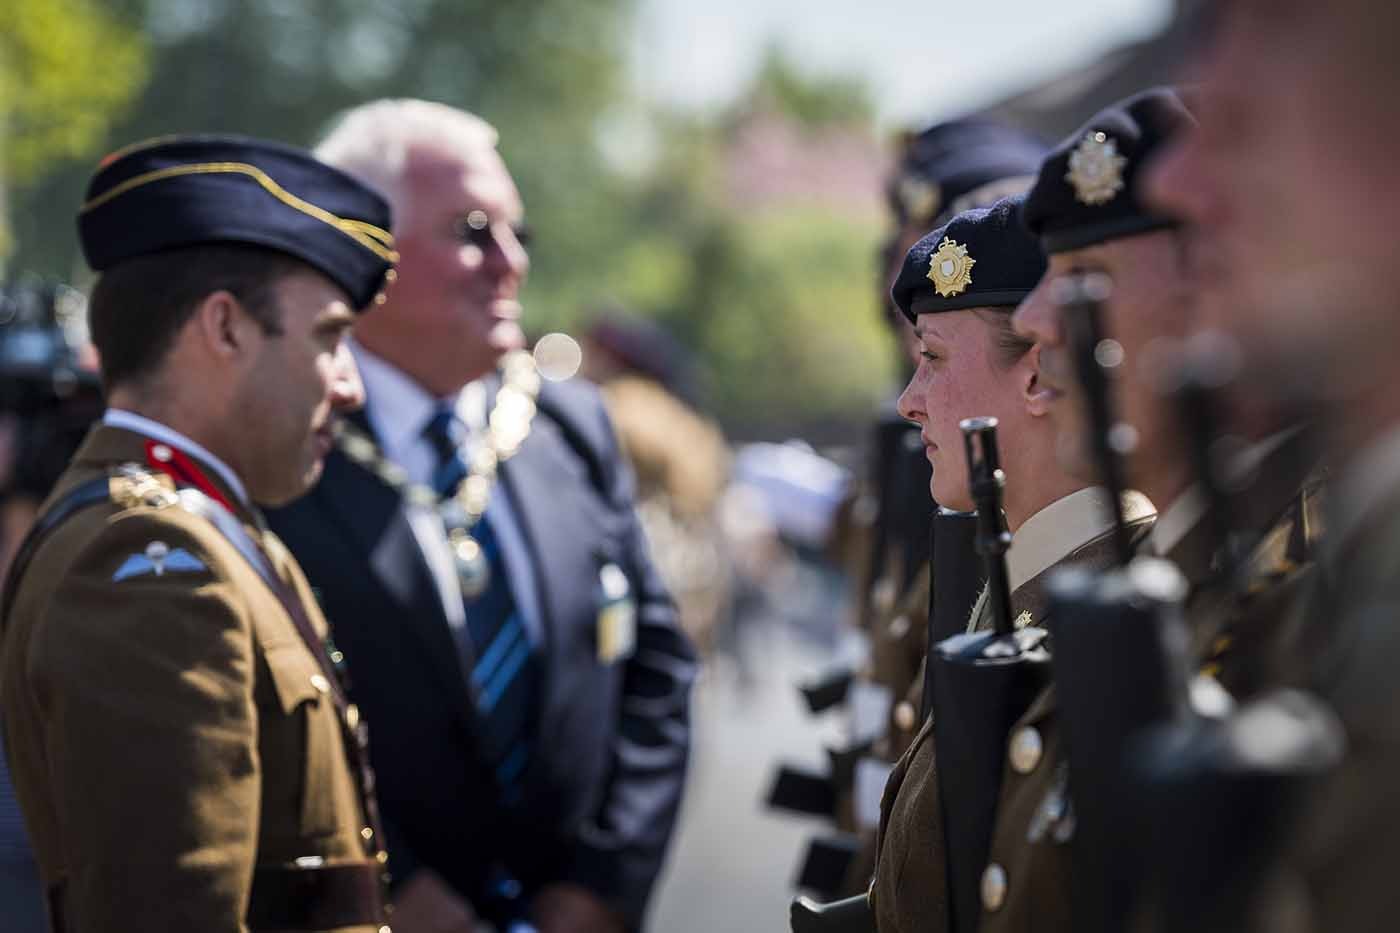 Boroughbridge salutes the soldiers on Freedom Parade